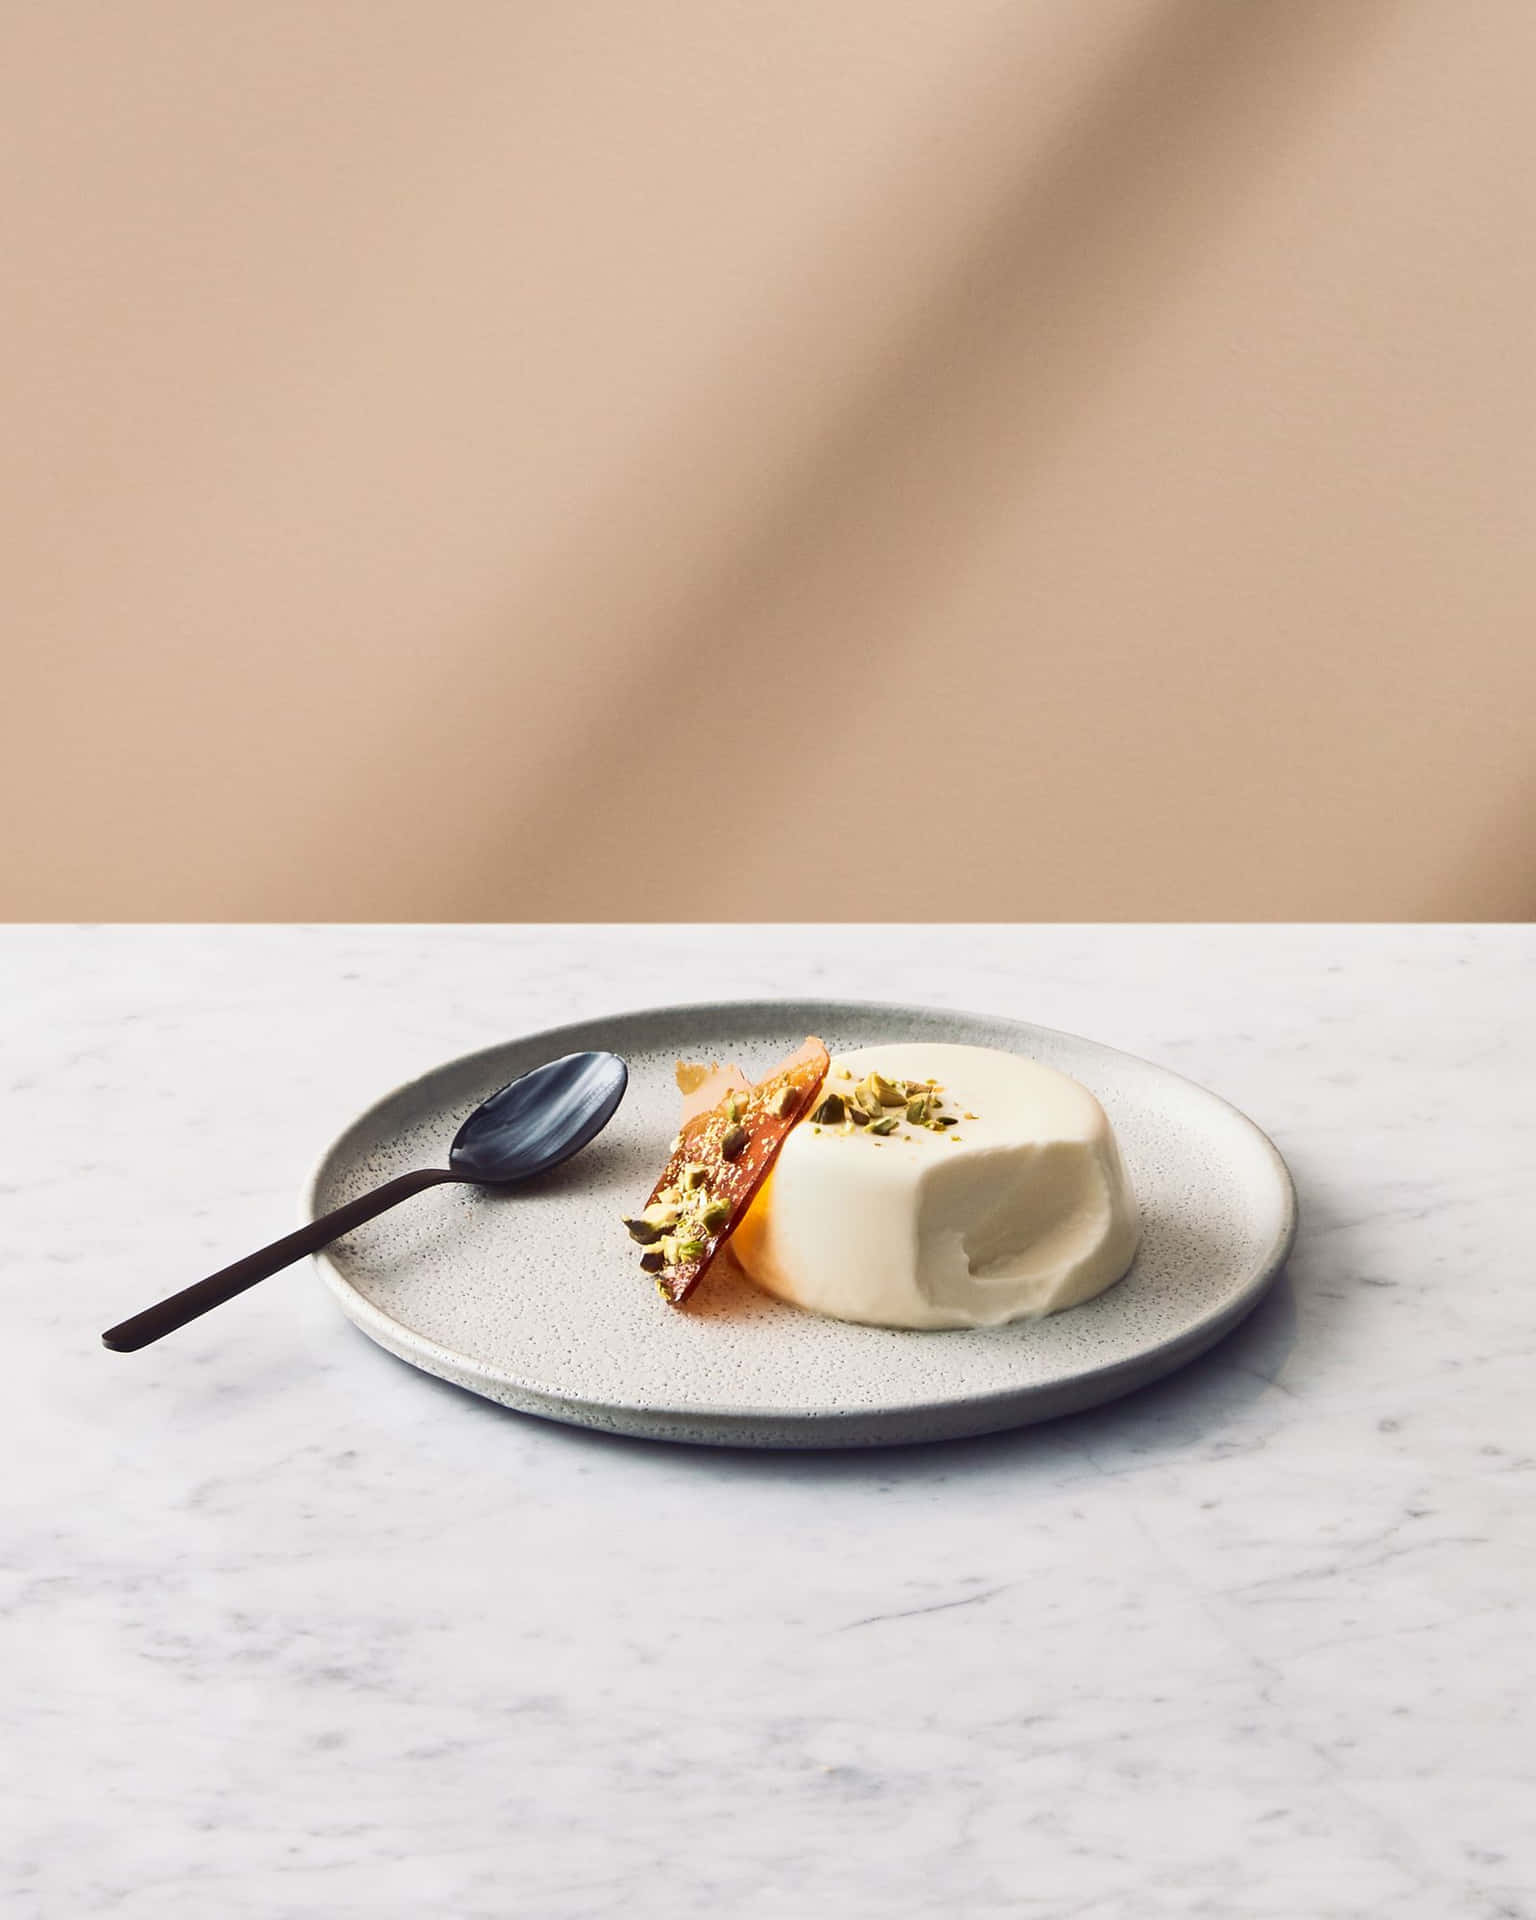 Delicious Minimalist Food Spread on a Wooden Surface Wallpaper